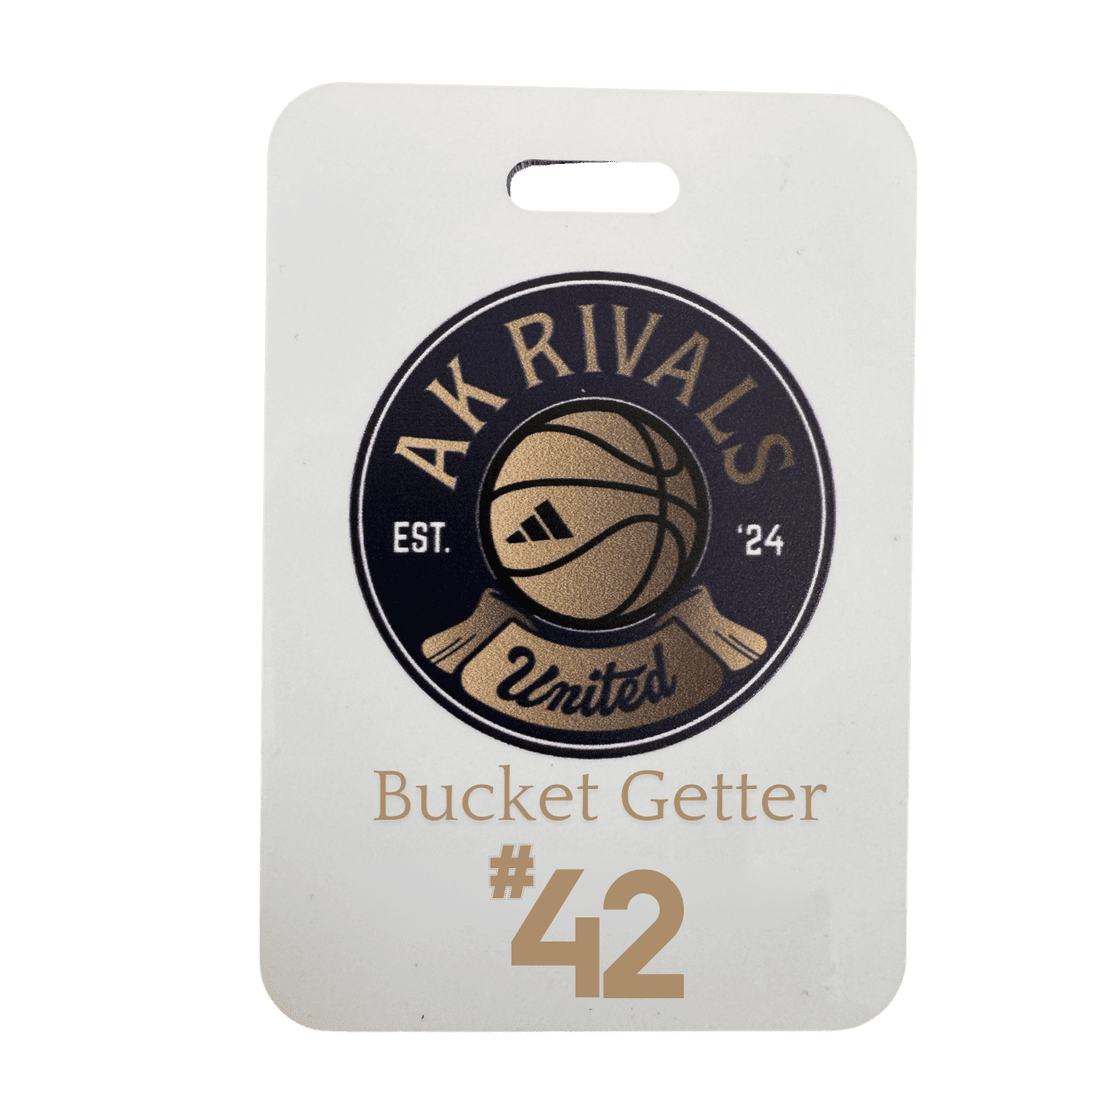 AK Rivals (Luggage Tags)